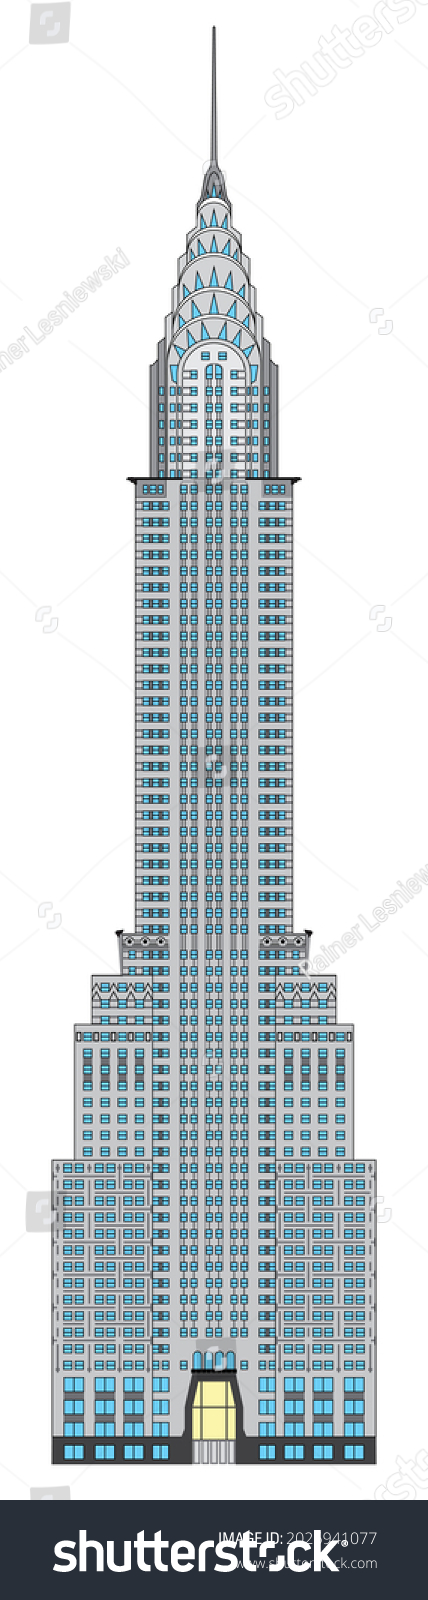 SVG of vector graphic of the Chrysler Building in New York City, USA  svg